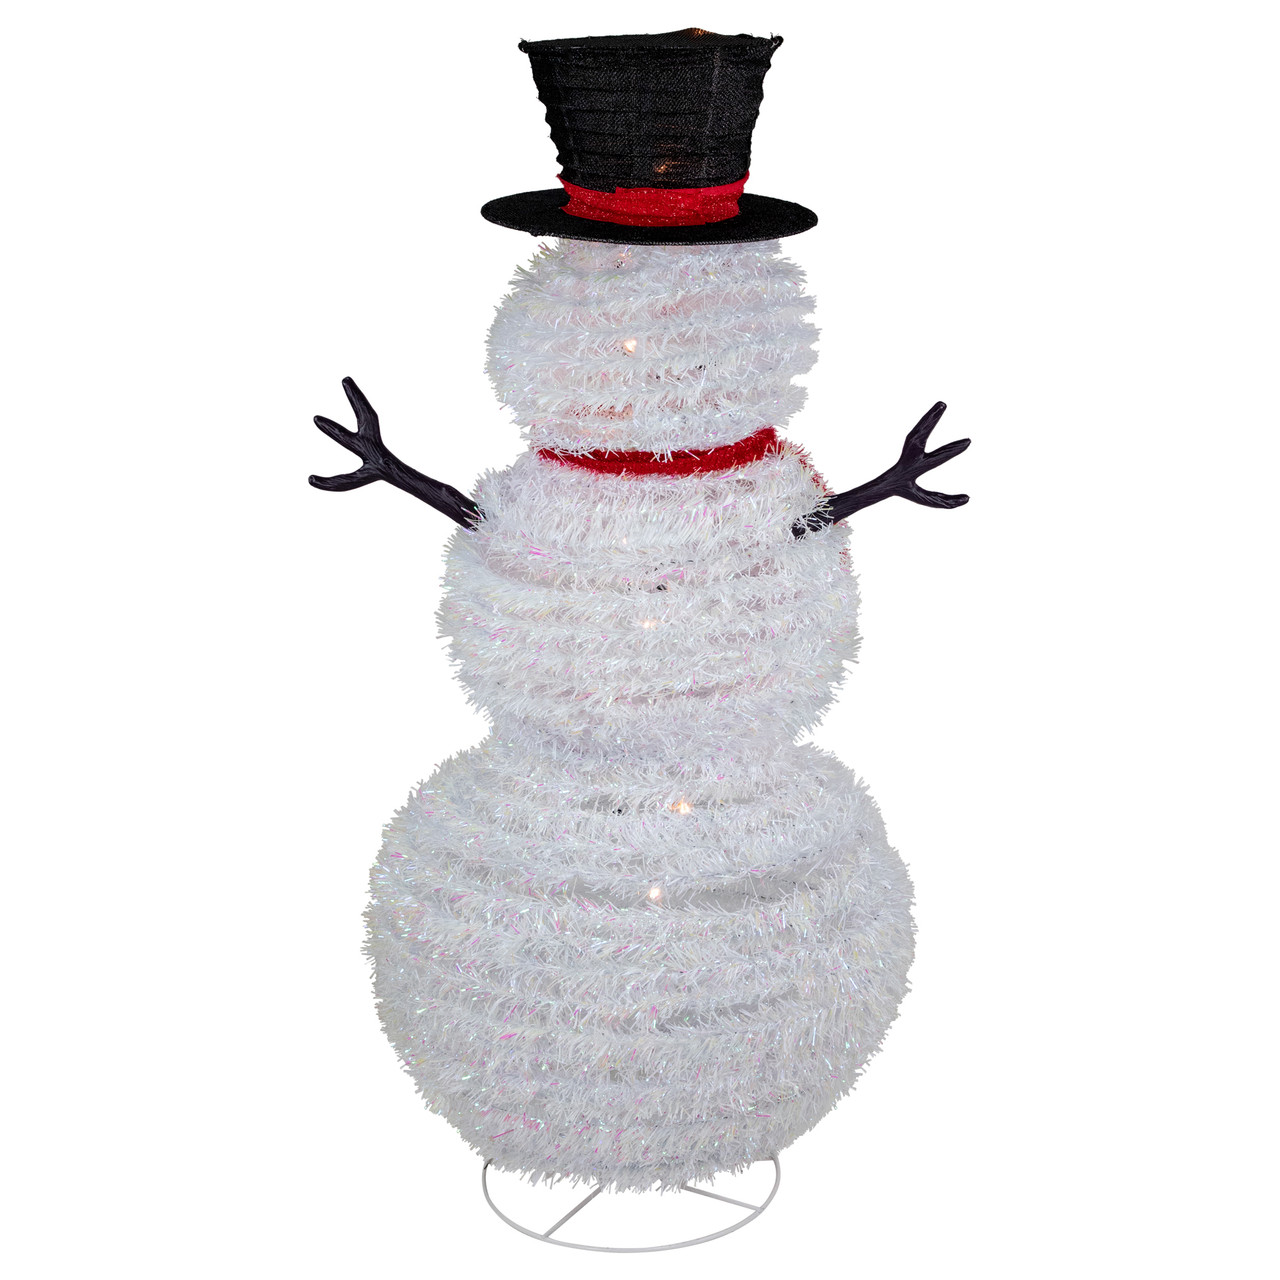 4' Lighted Pop-Up Snowman Outdoor Christmas Decoration | Christmas Central